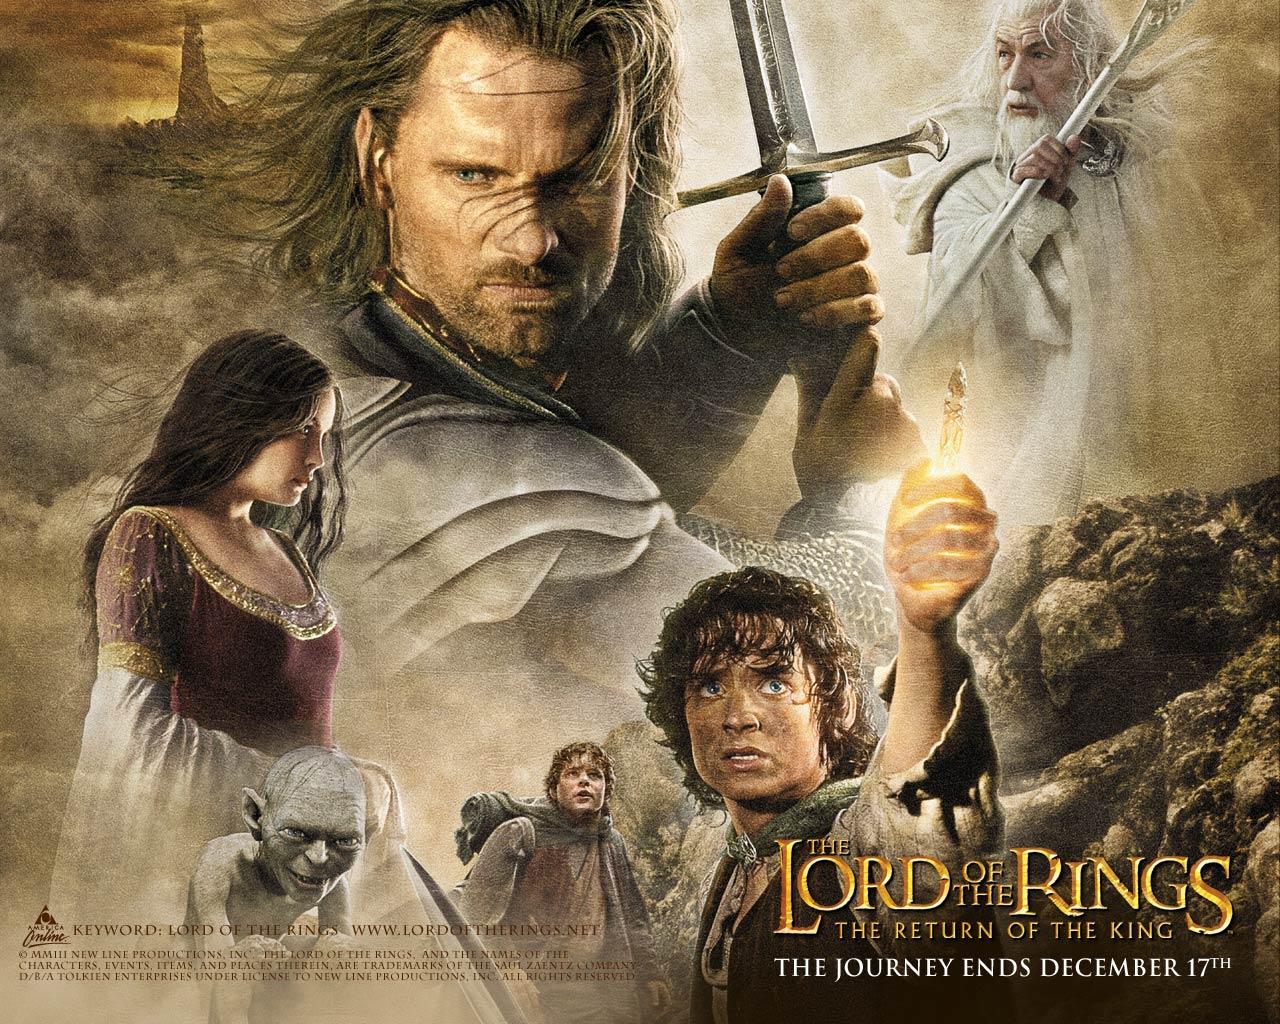 The Lord Of The Rings: The Return Of The King Hintergrundbild 1280x1024. The Return of The King Wallpaper Free The Return of The King Background